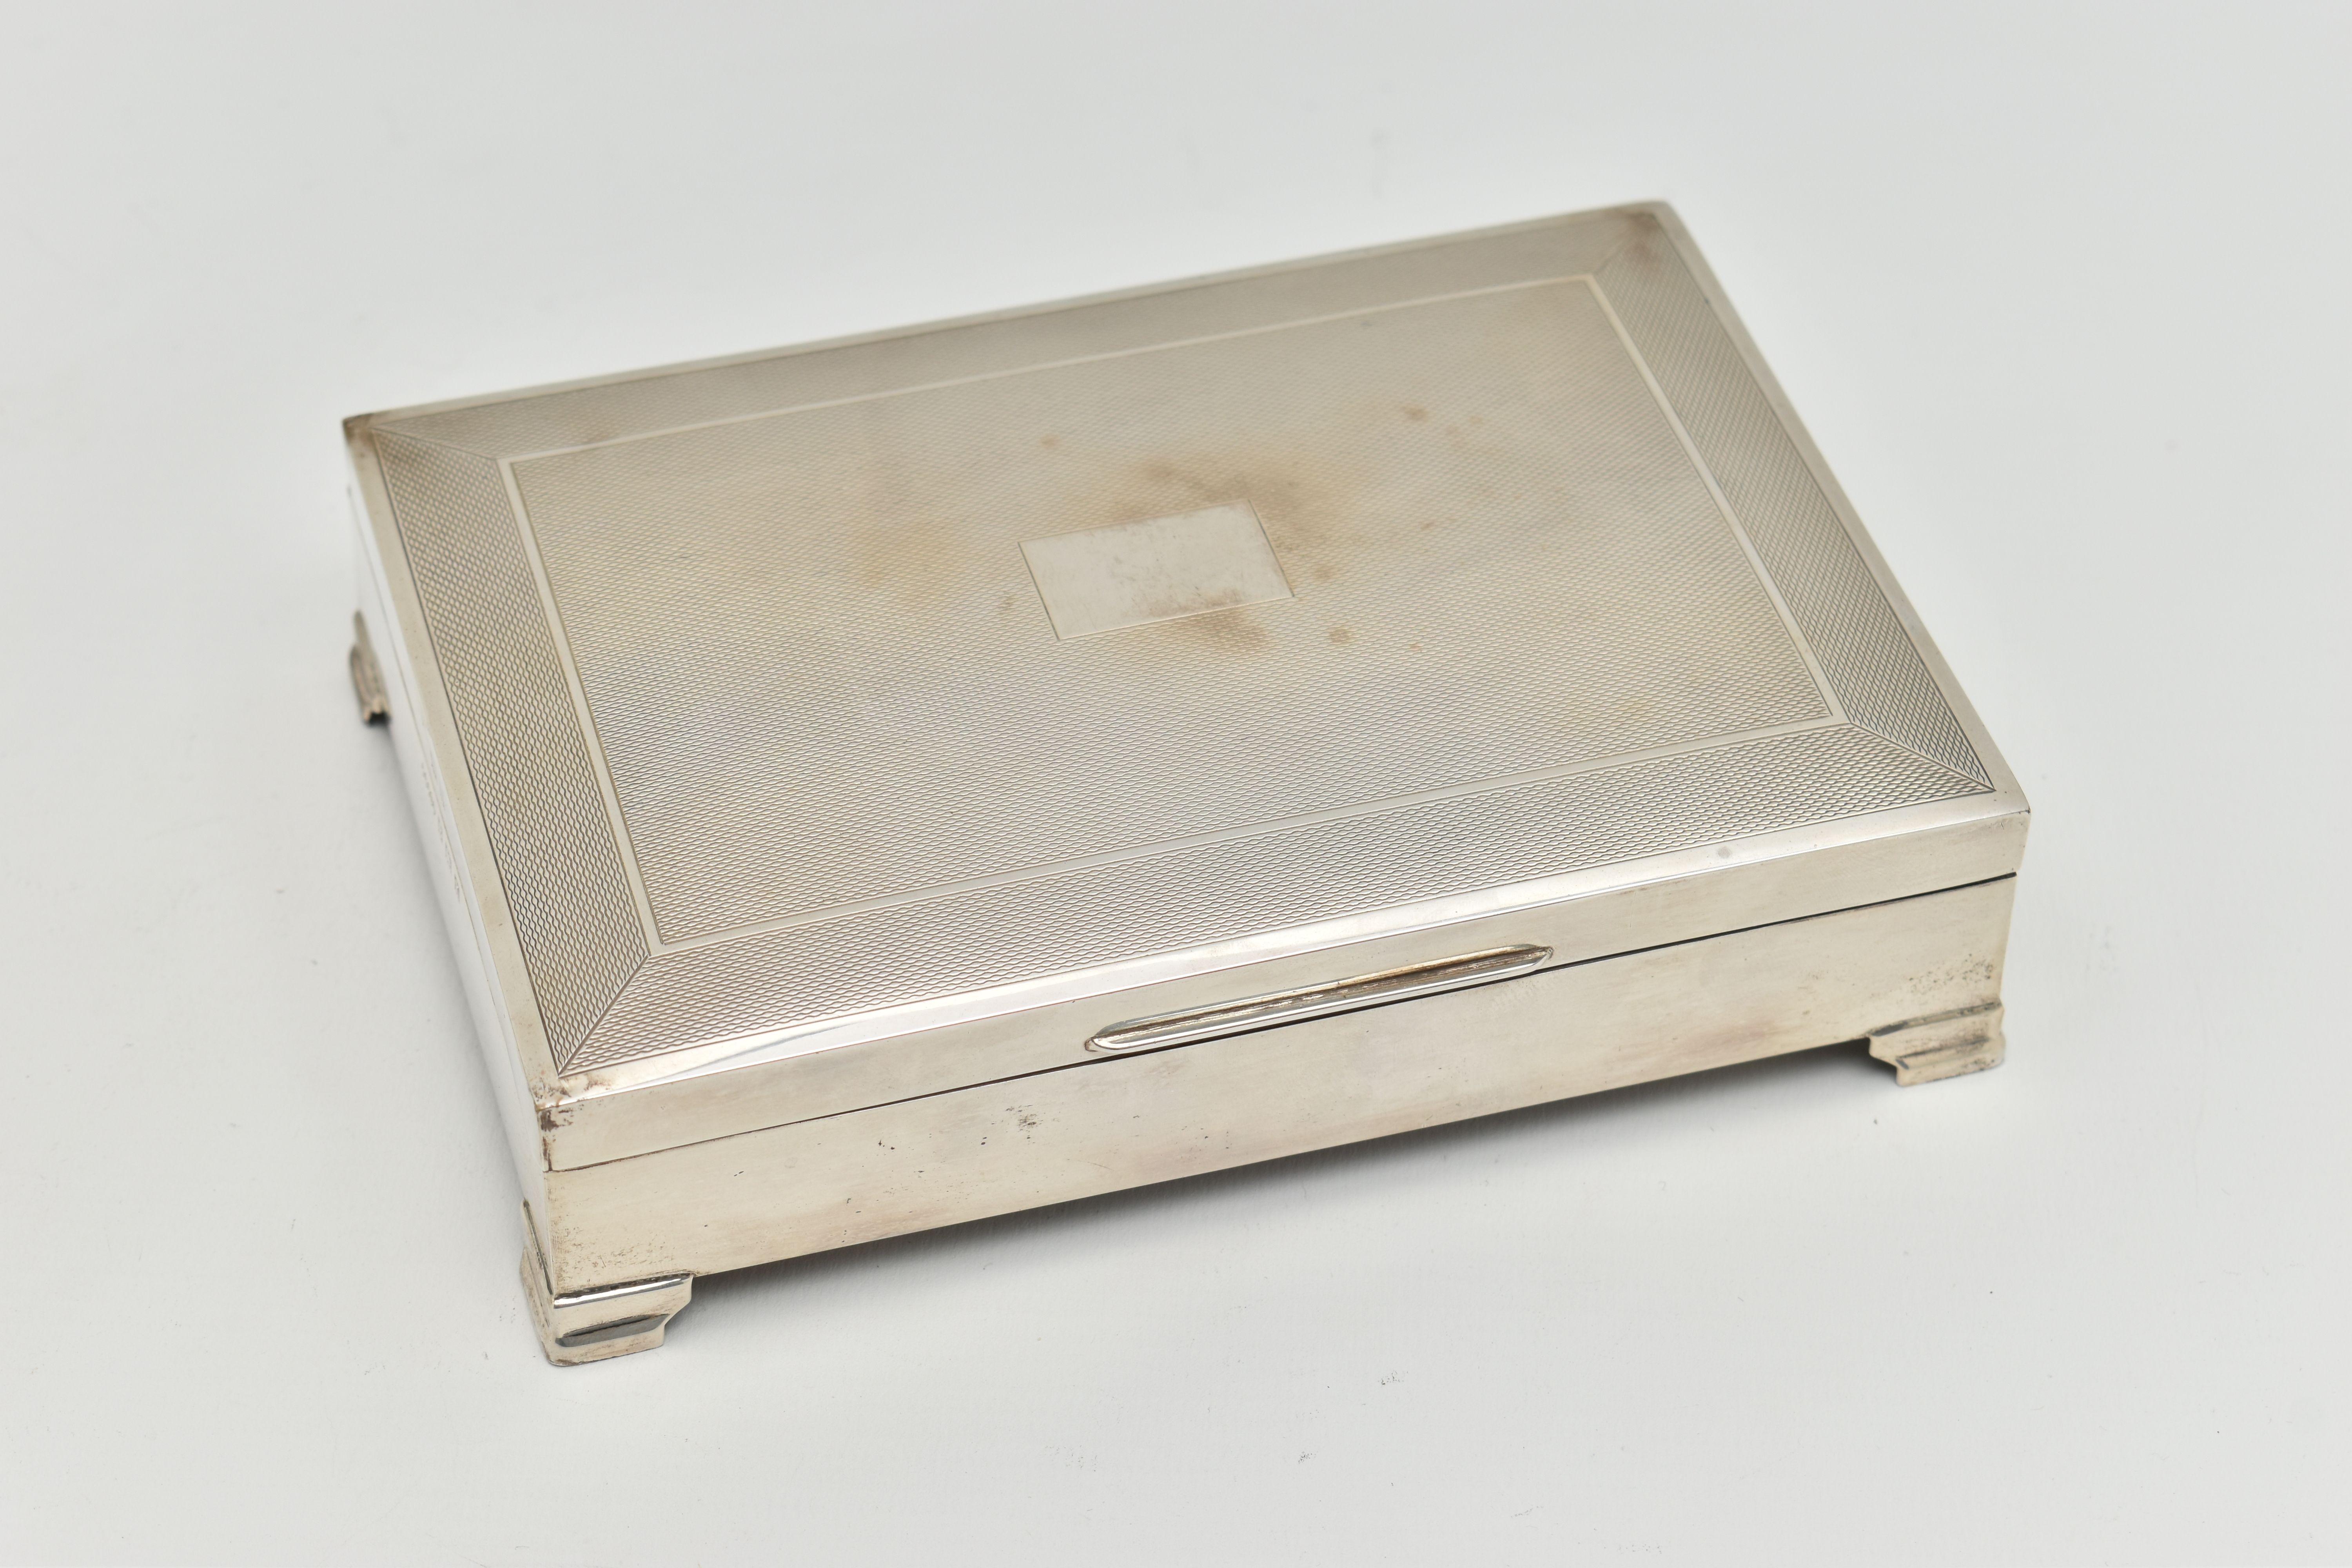 AN ELIZABETH II SILVER CIGARETTE BOX, rectangular engine turned pattern box with vacant cartouche,